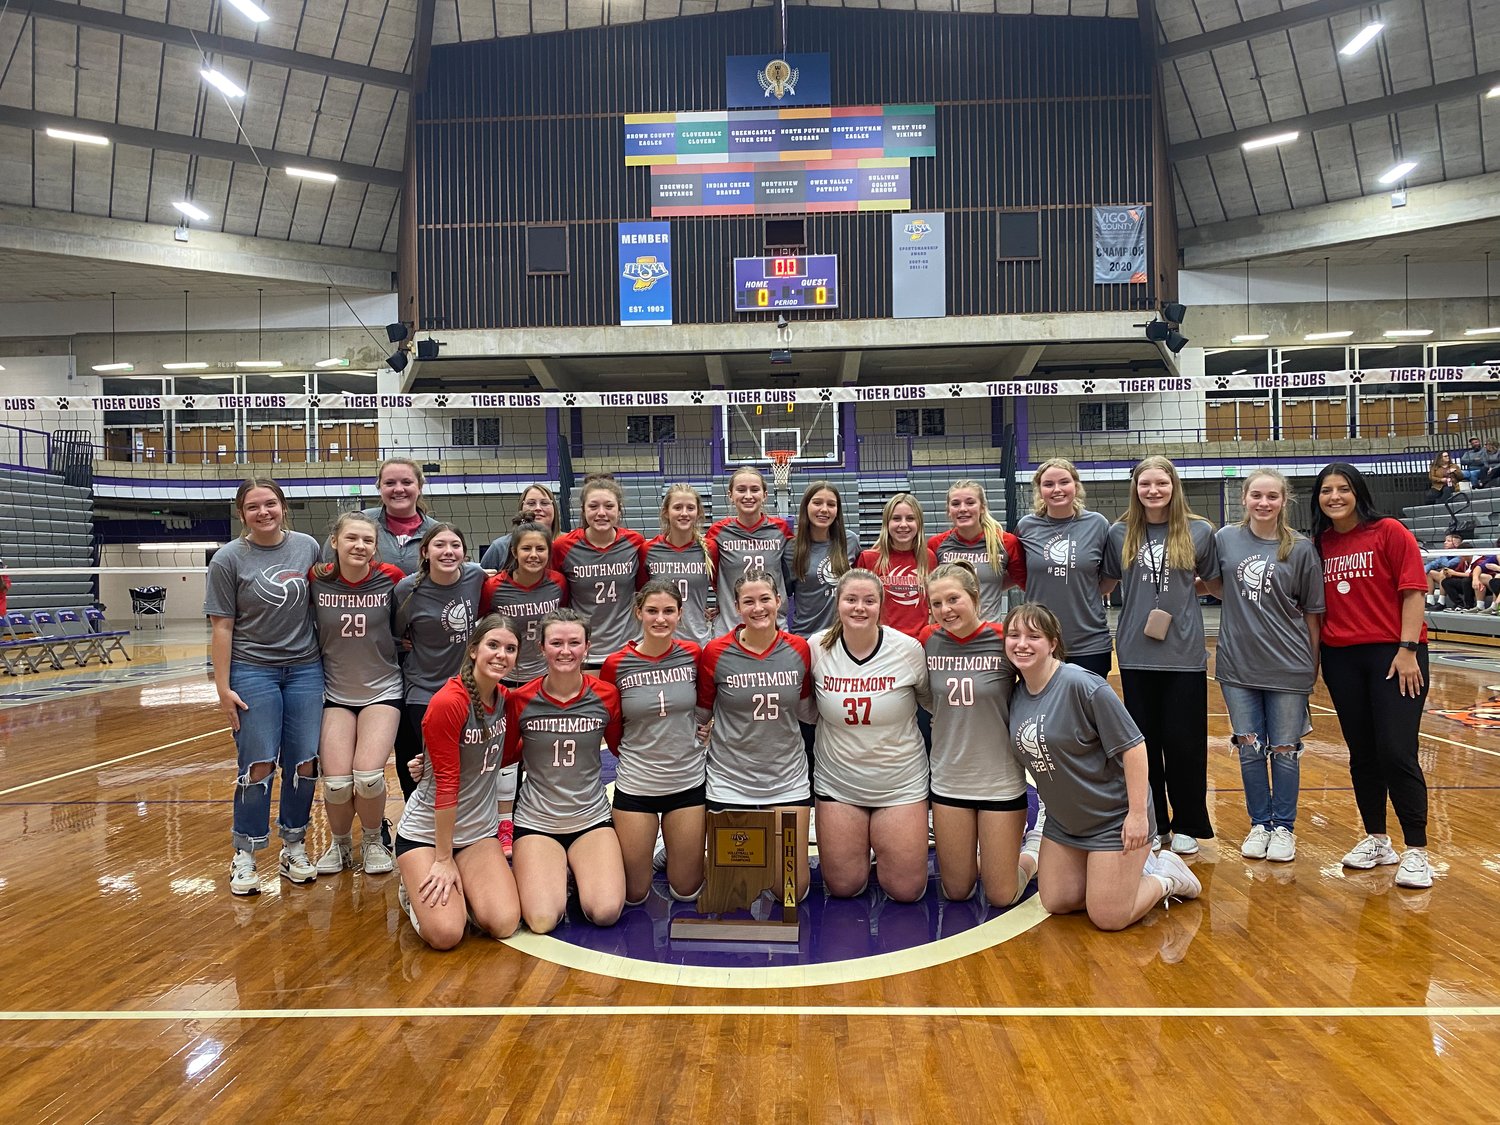 Southmont volleyball saw a 12 win turnaround from last season. Saturday’s sectional championship win was the 2nd in 4 seasons for the Mounties as they swept Greencastle 3-0 to bring home the hardware.